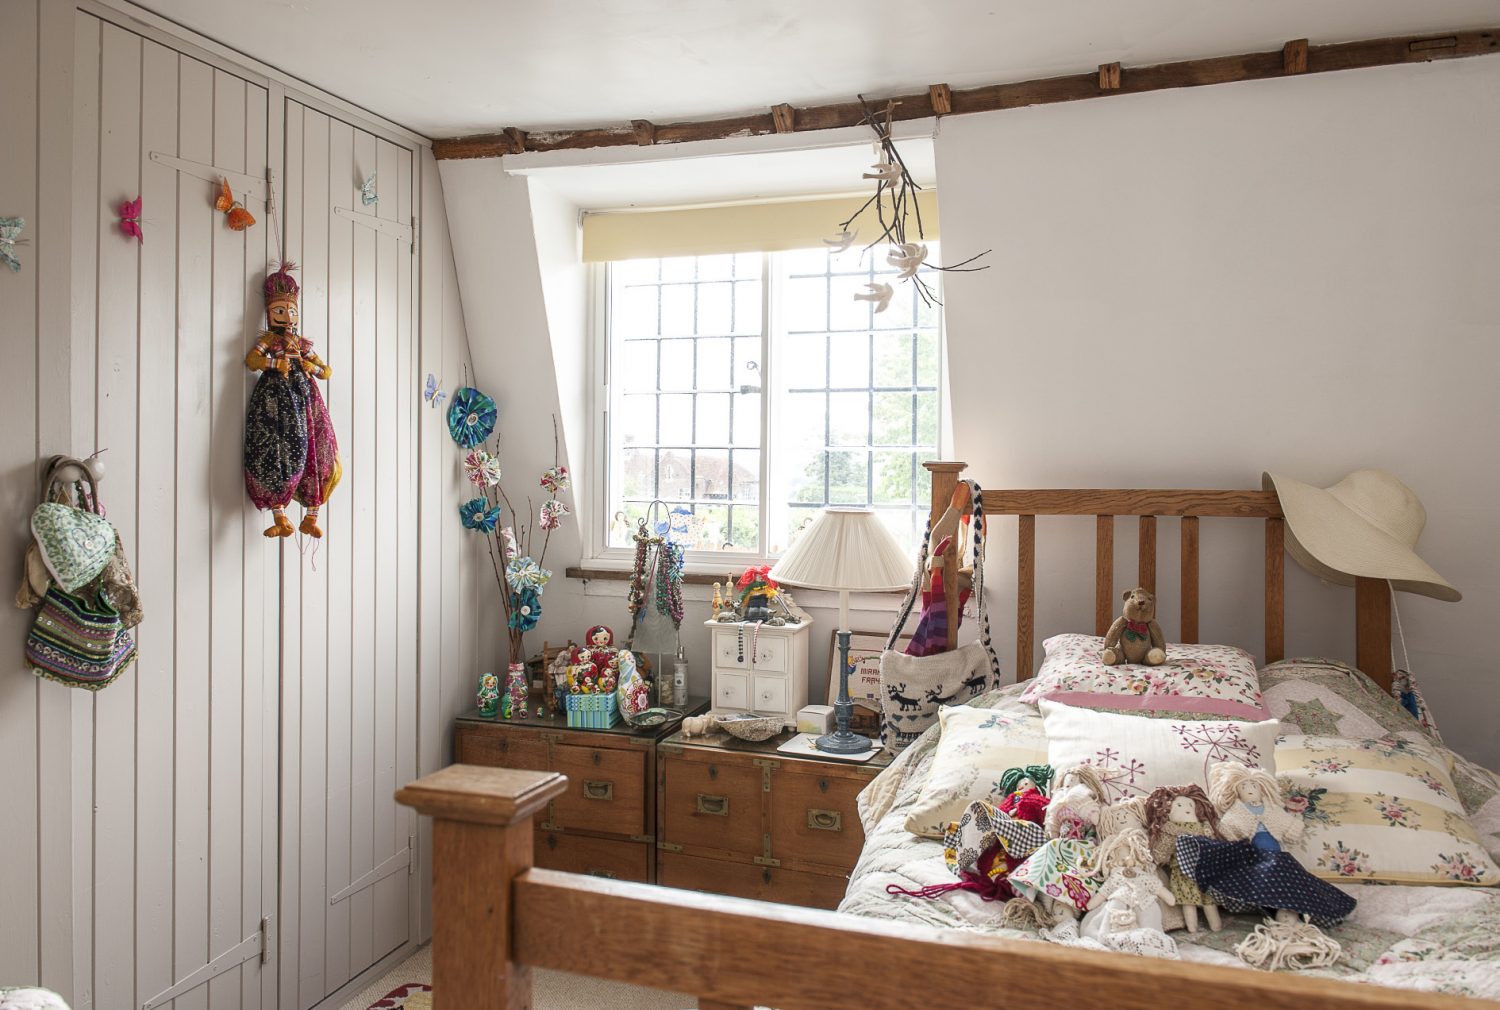 Suzanne and Tim’s daughter’s room is a sweet, light-filled space